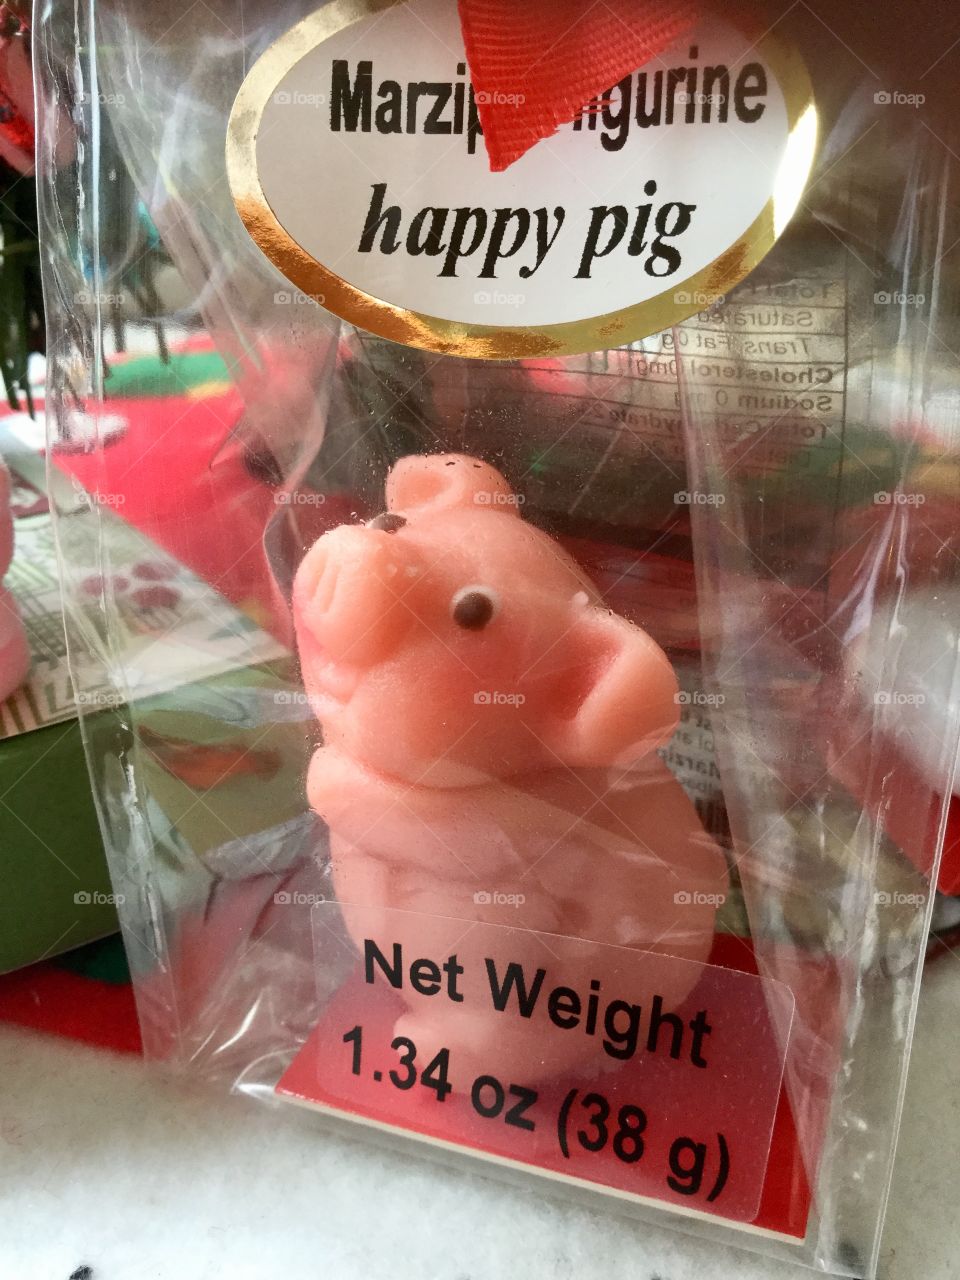 Sweet and cute Marzipan piglet 